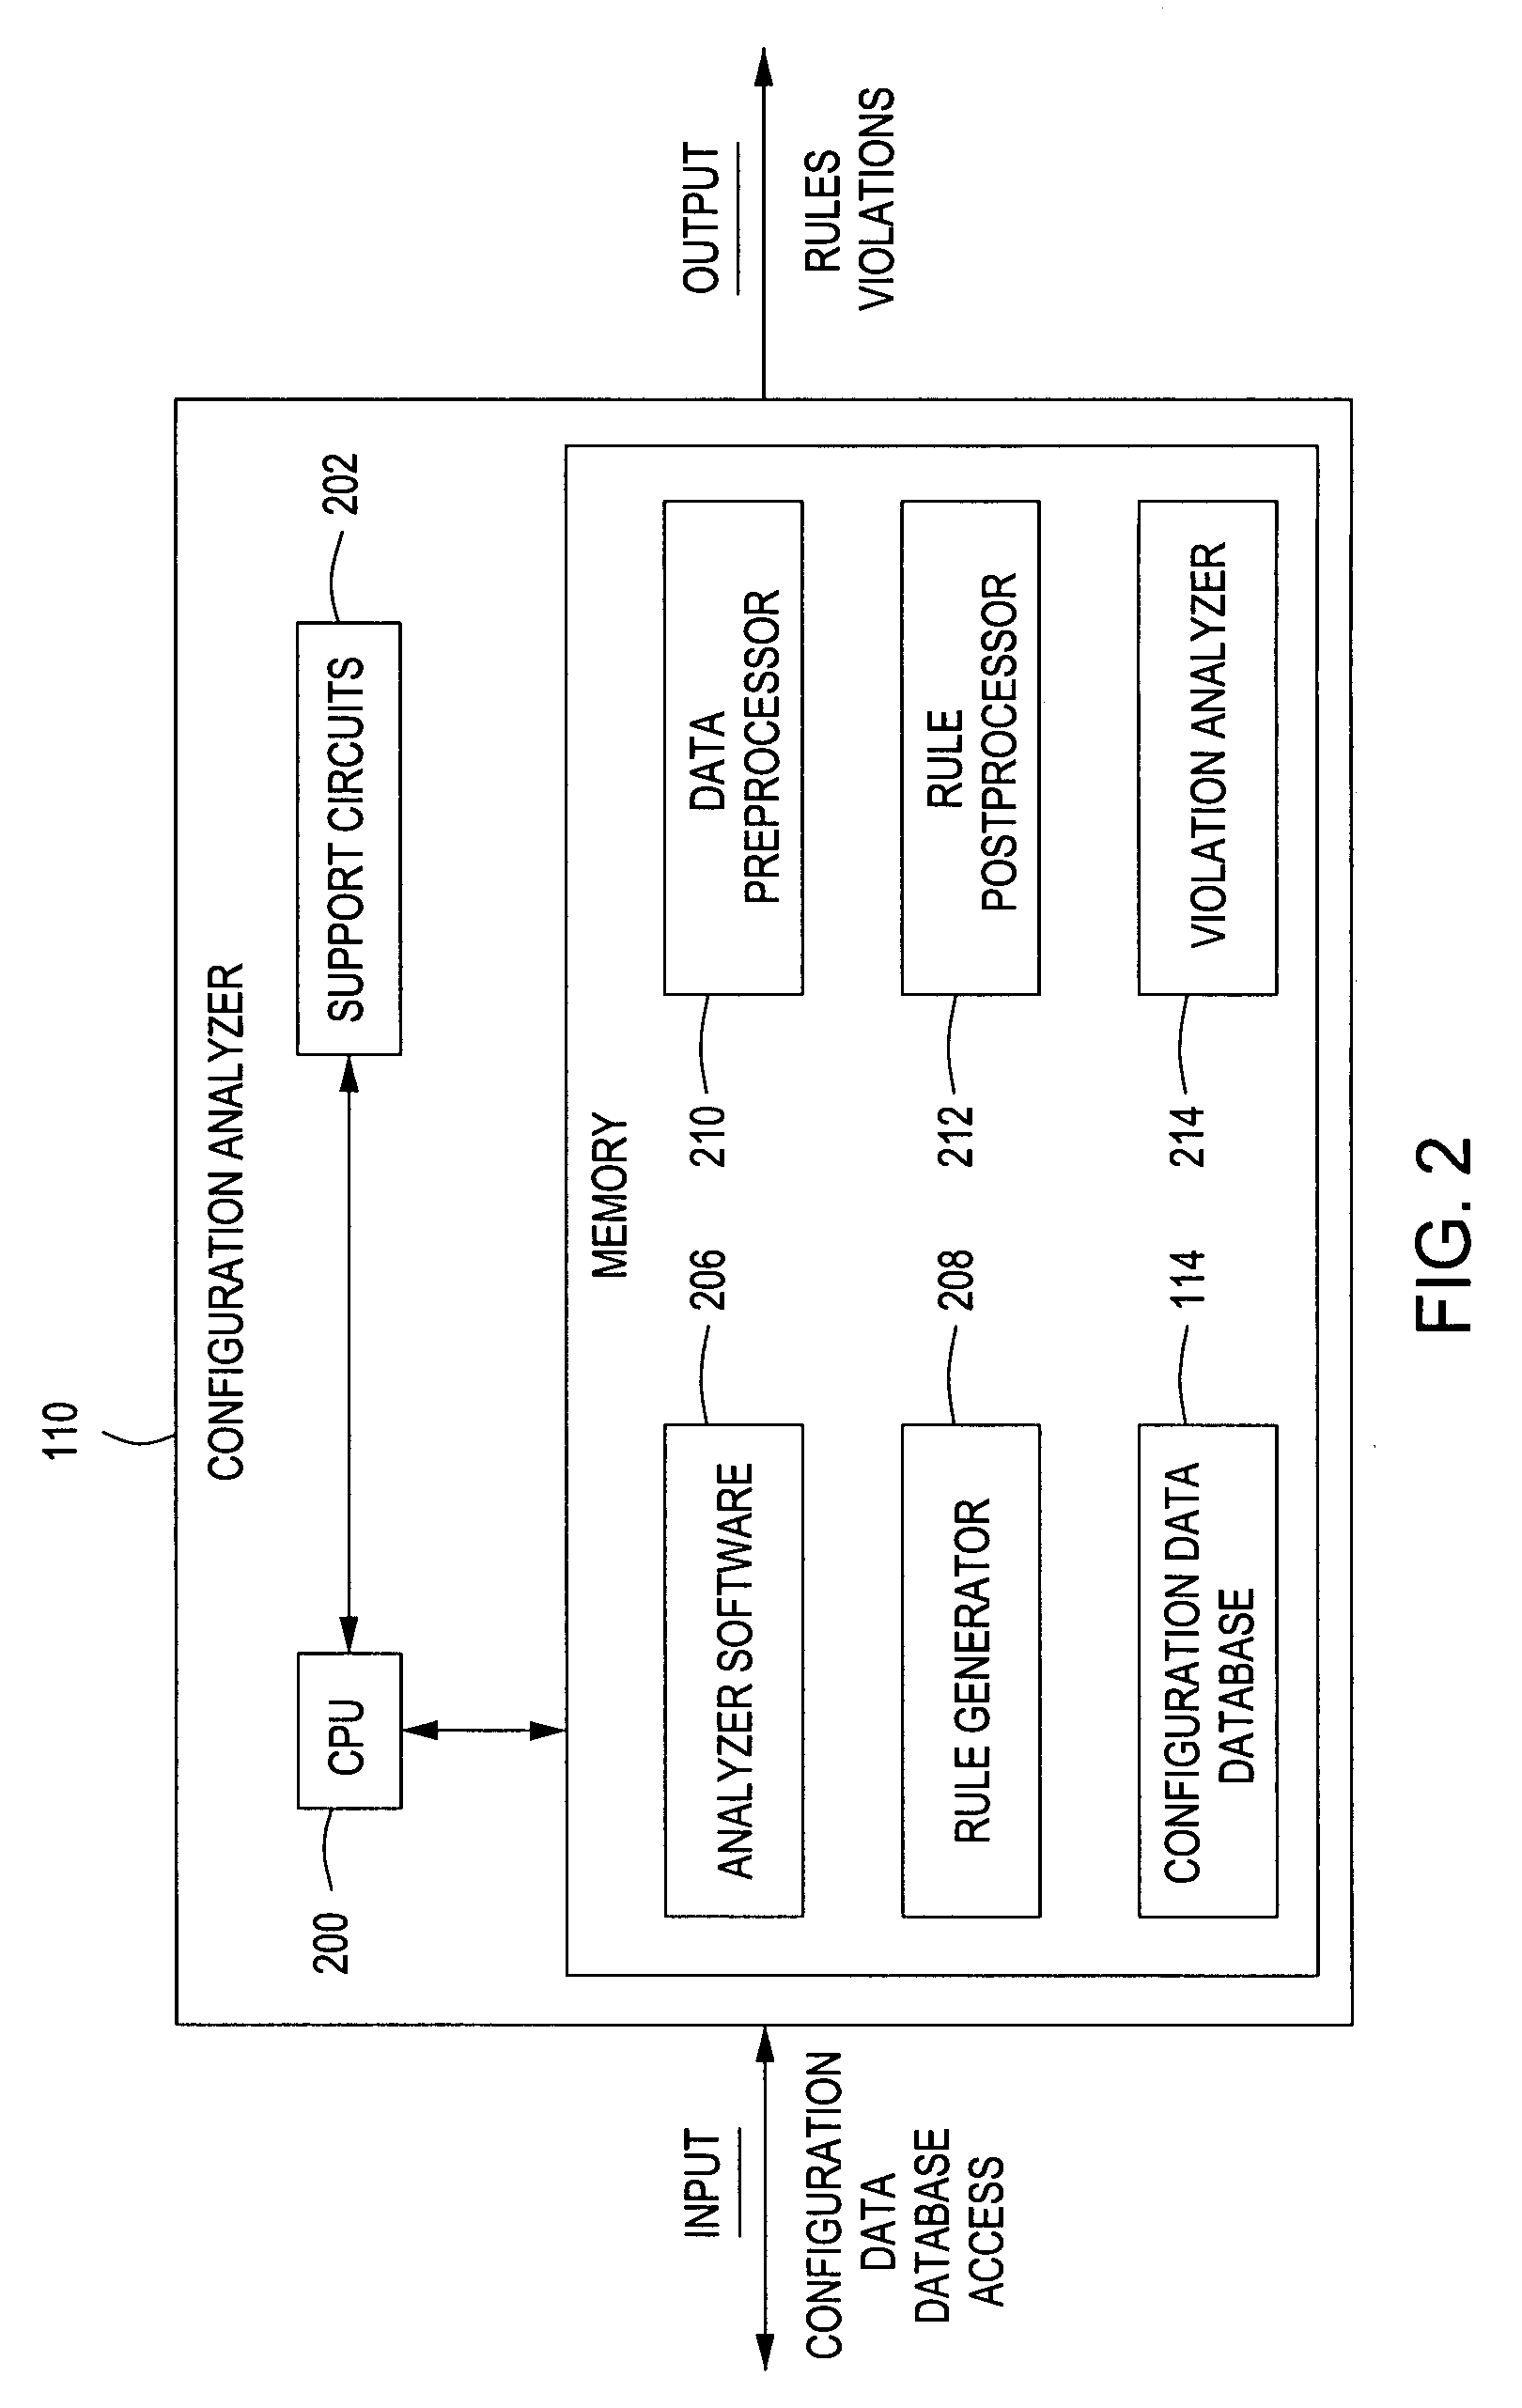 Method and apparatus for generating configuration rules for computing entities within a computing environment using association rule mining